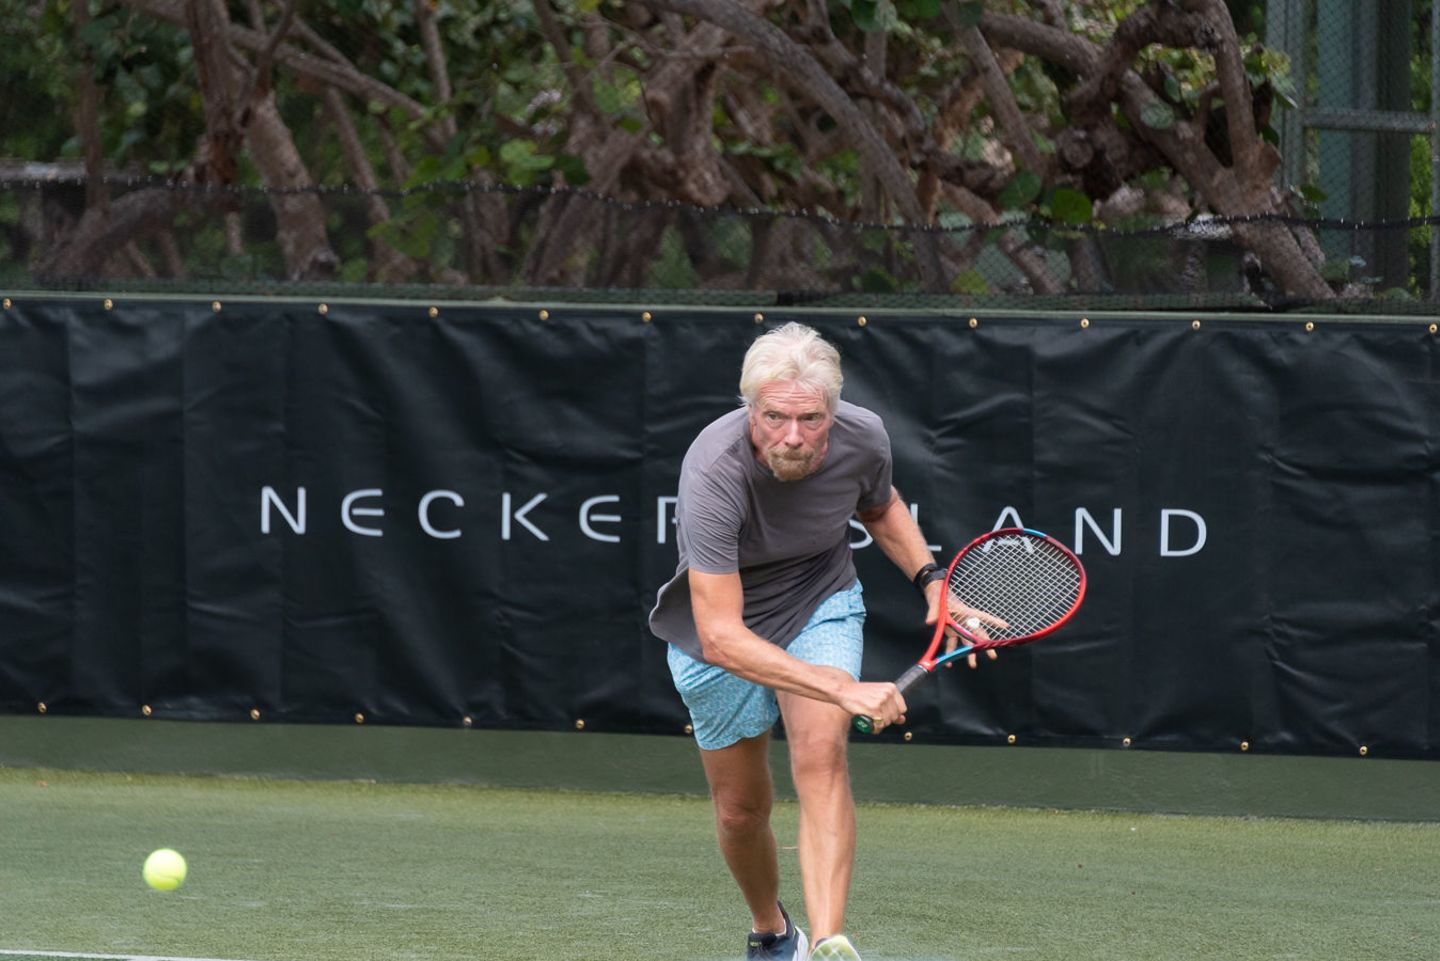 Richard Branson playing tennis at the 2022 Necker Cup